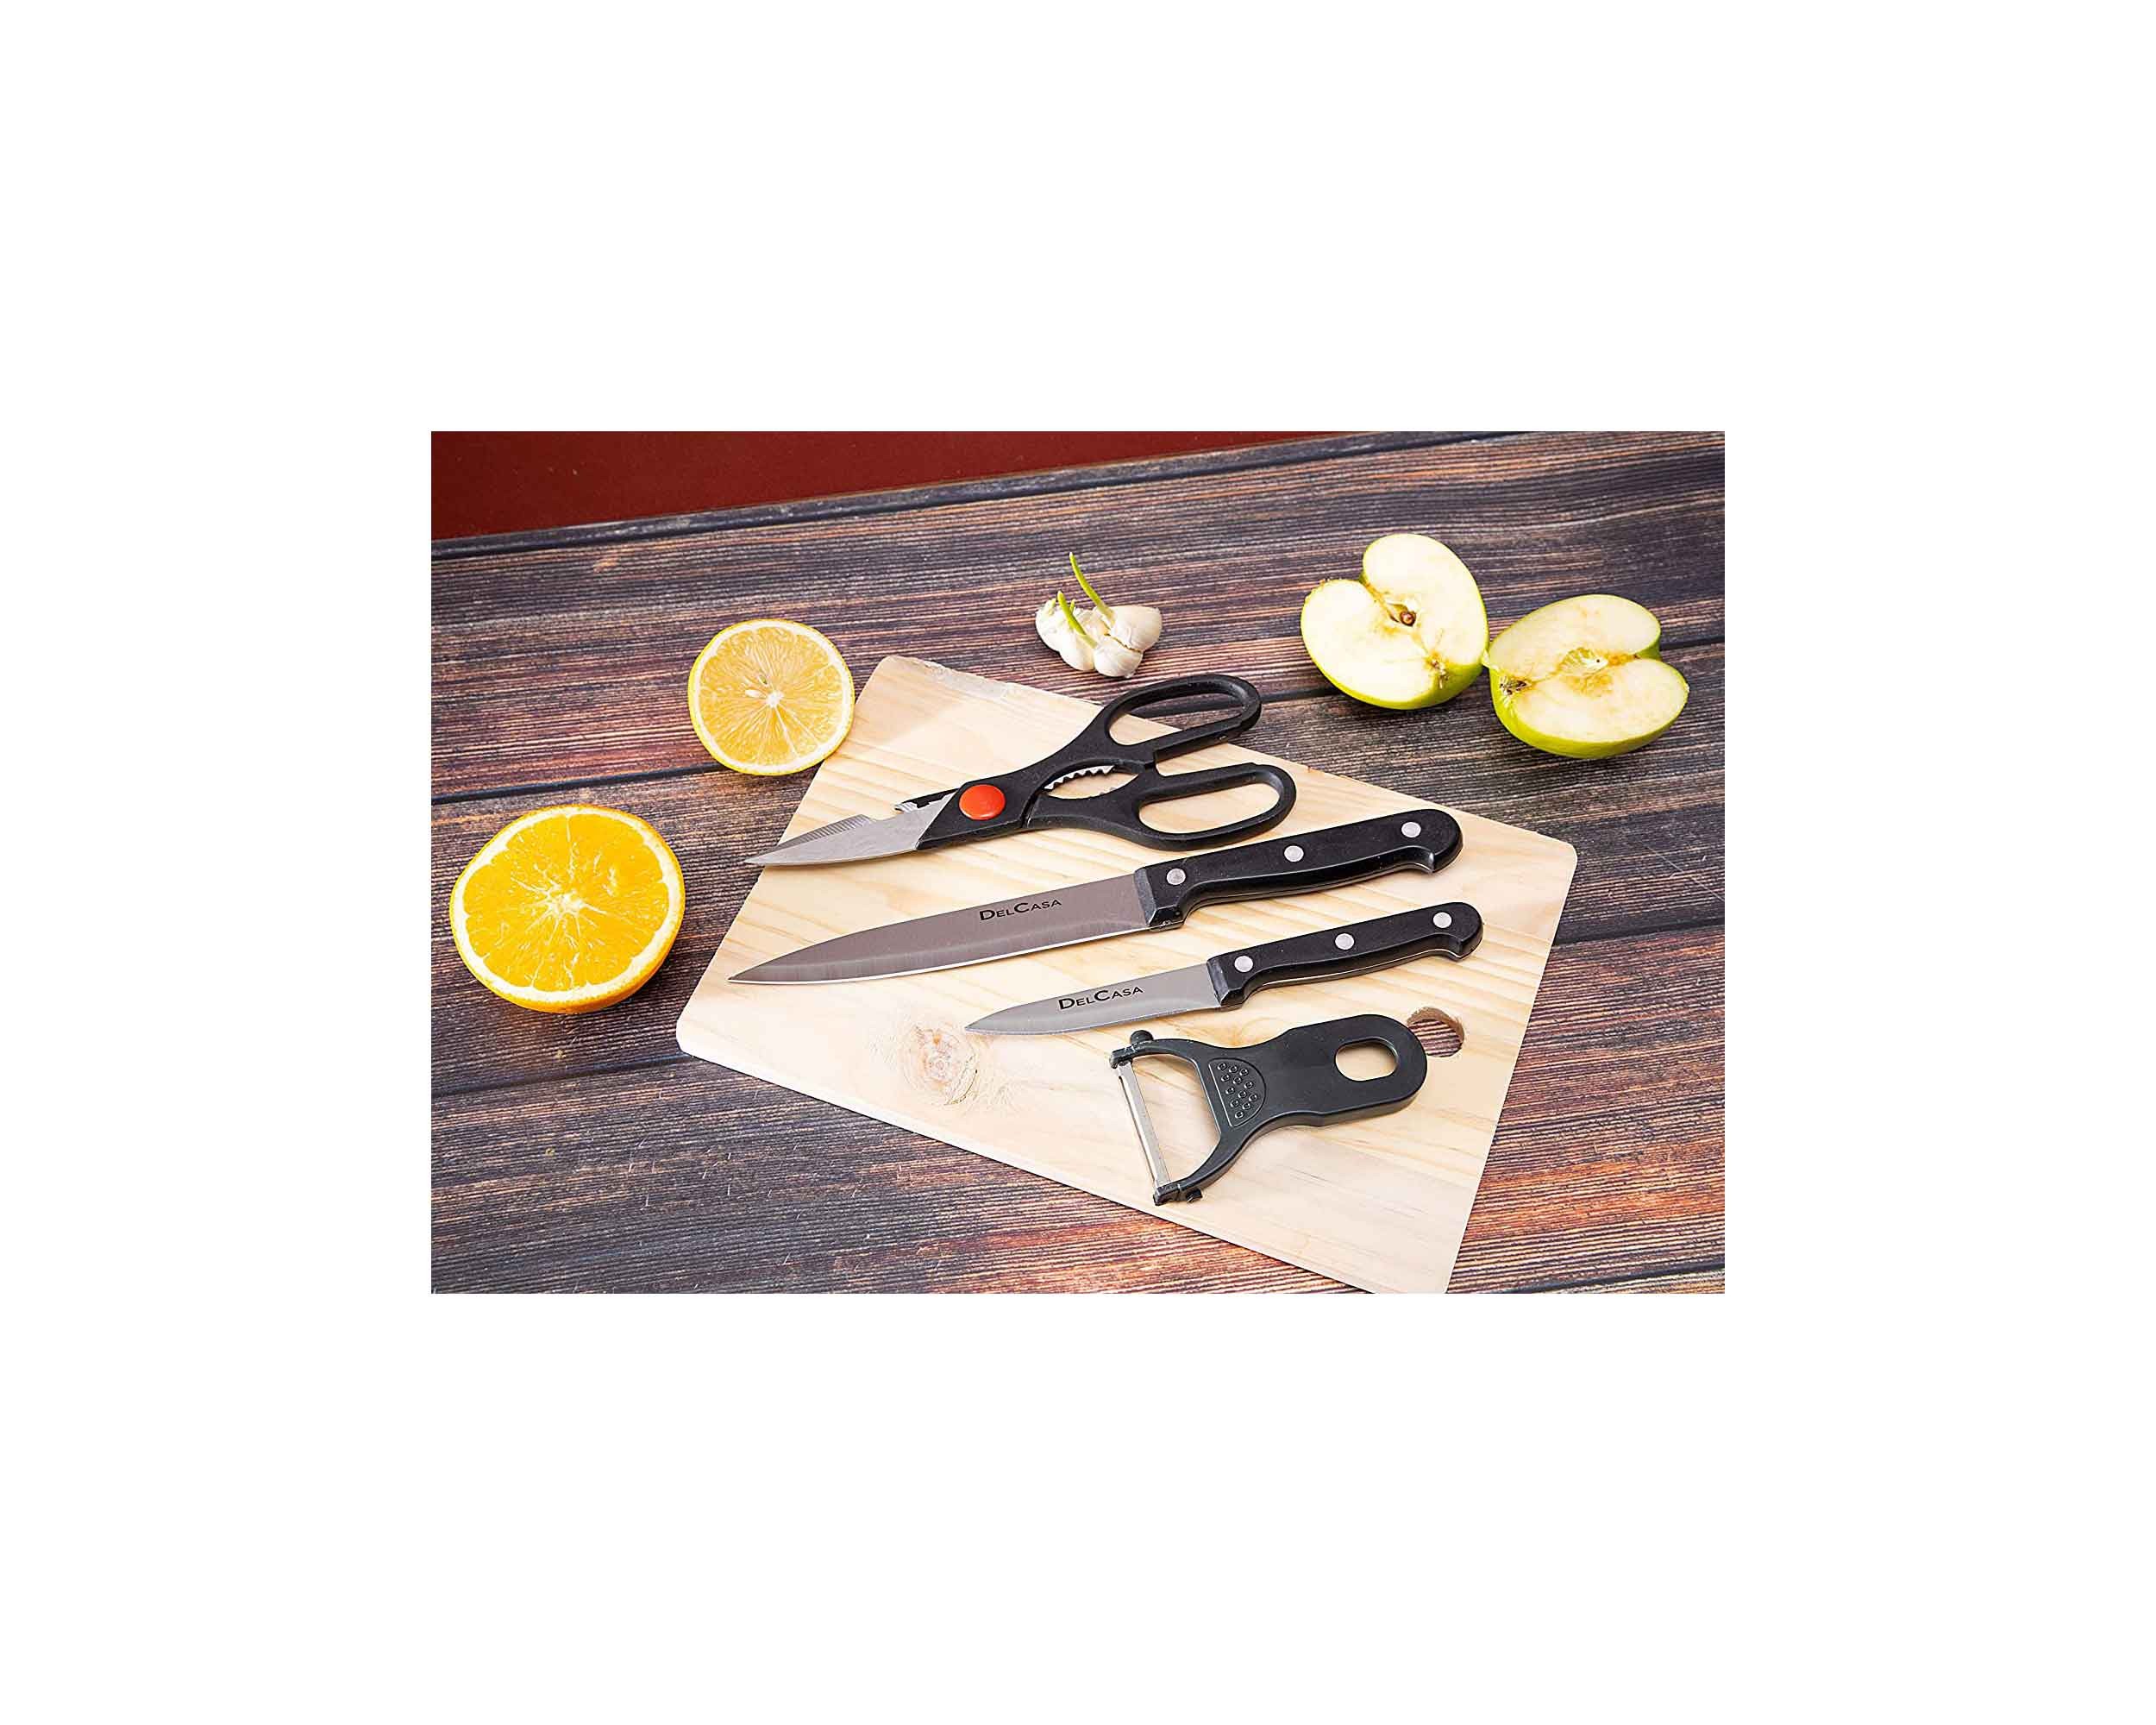 Buy Delcasa 5 Pcs Kitchen Knife Set With Cutting Board Online in